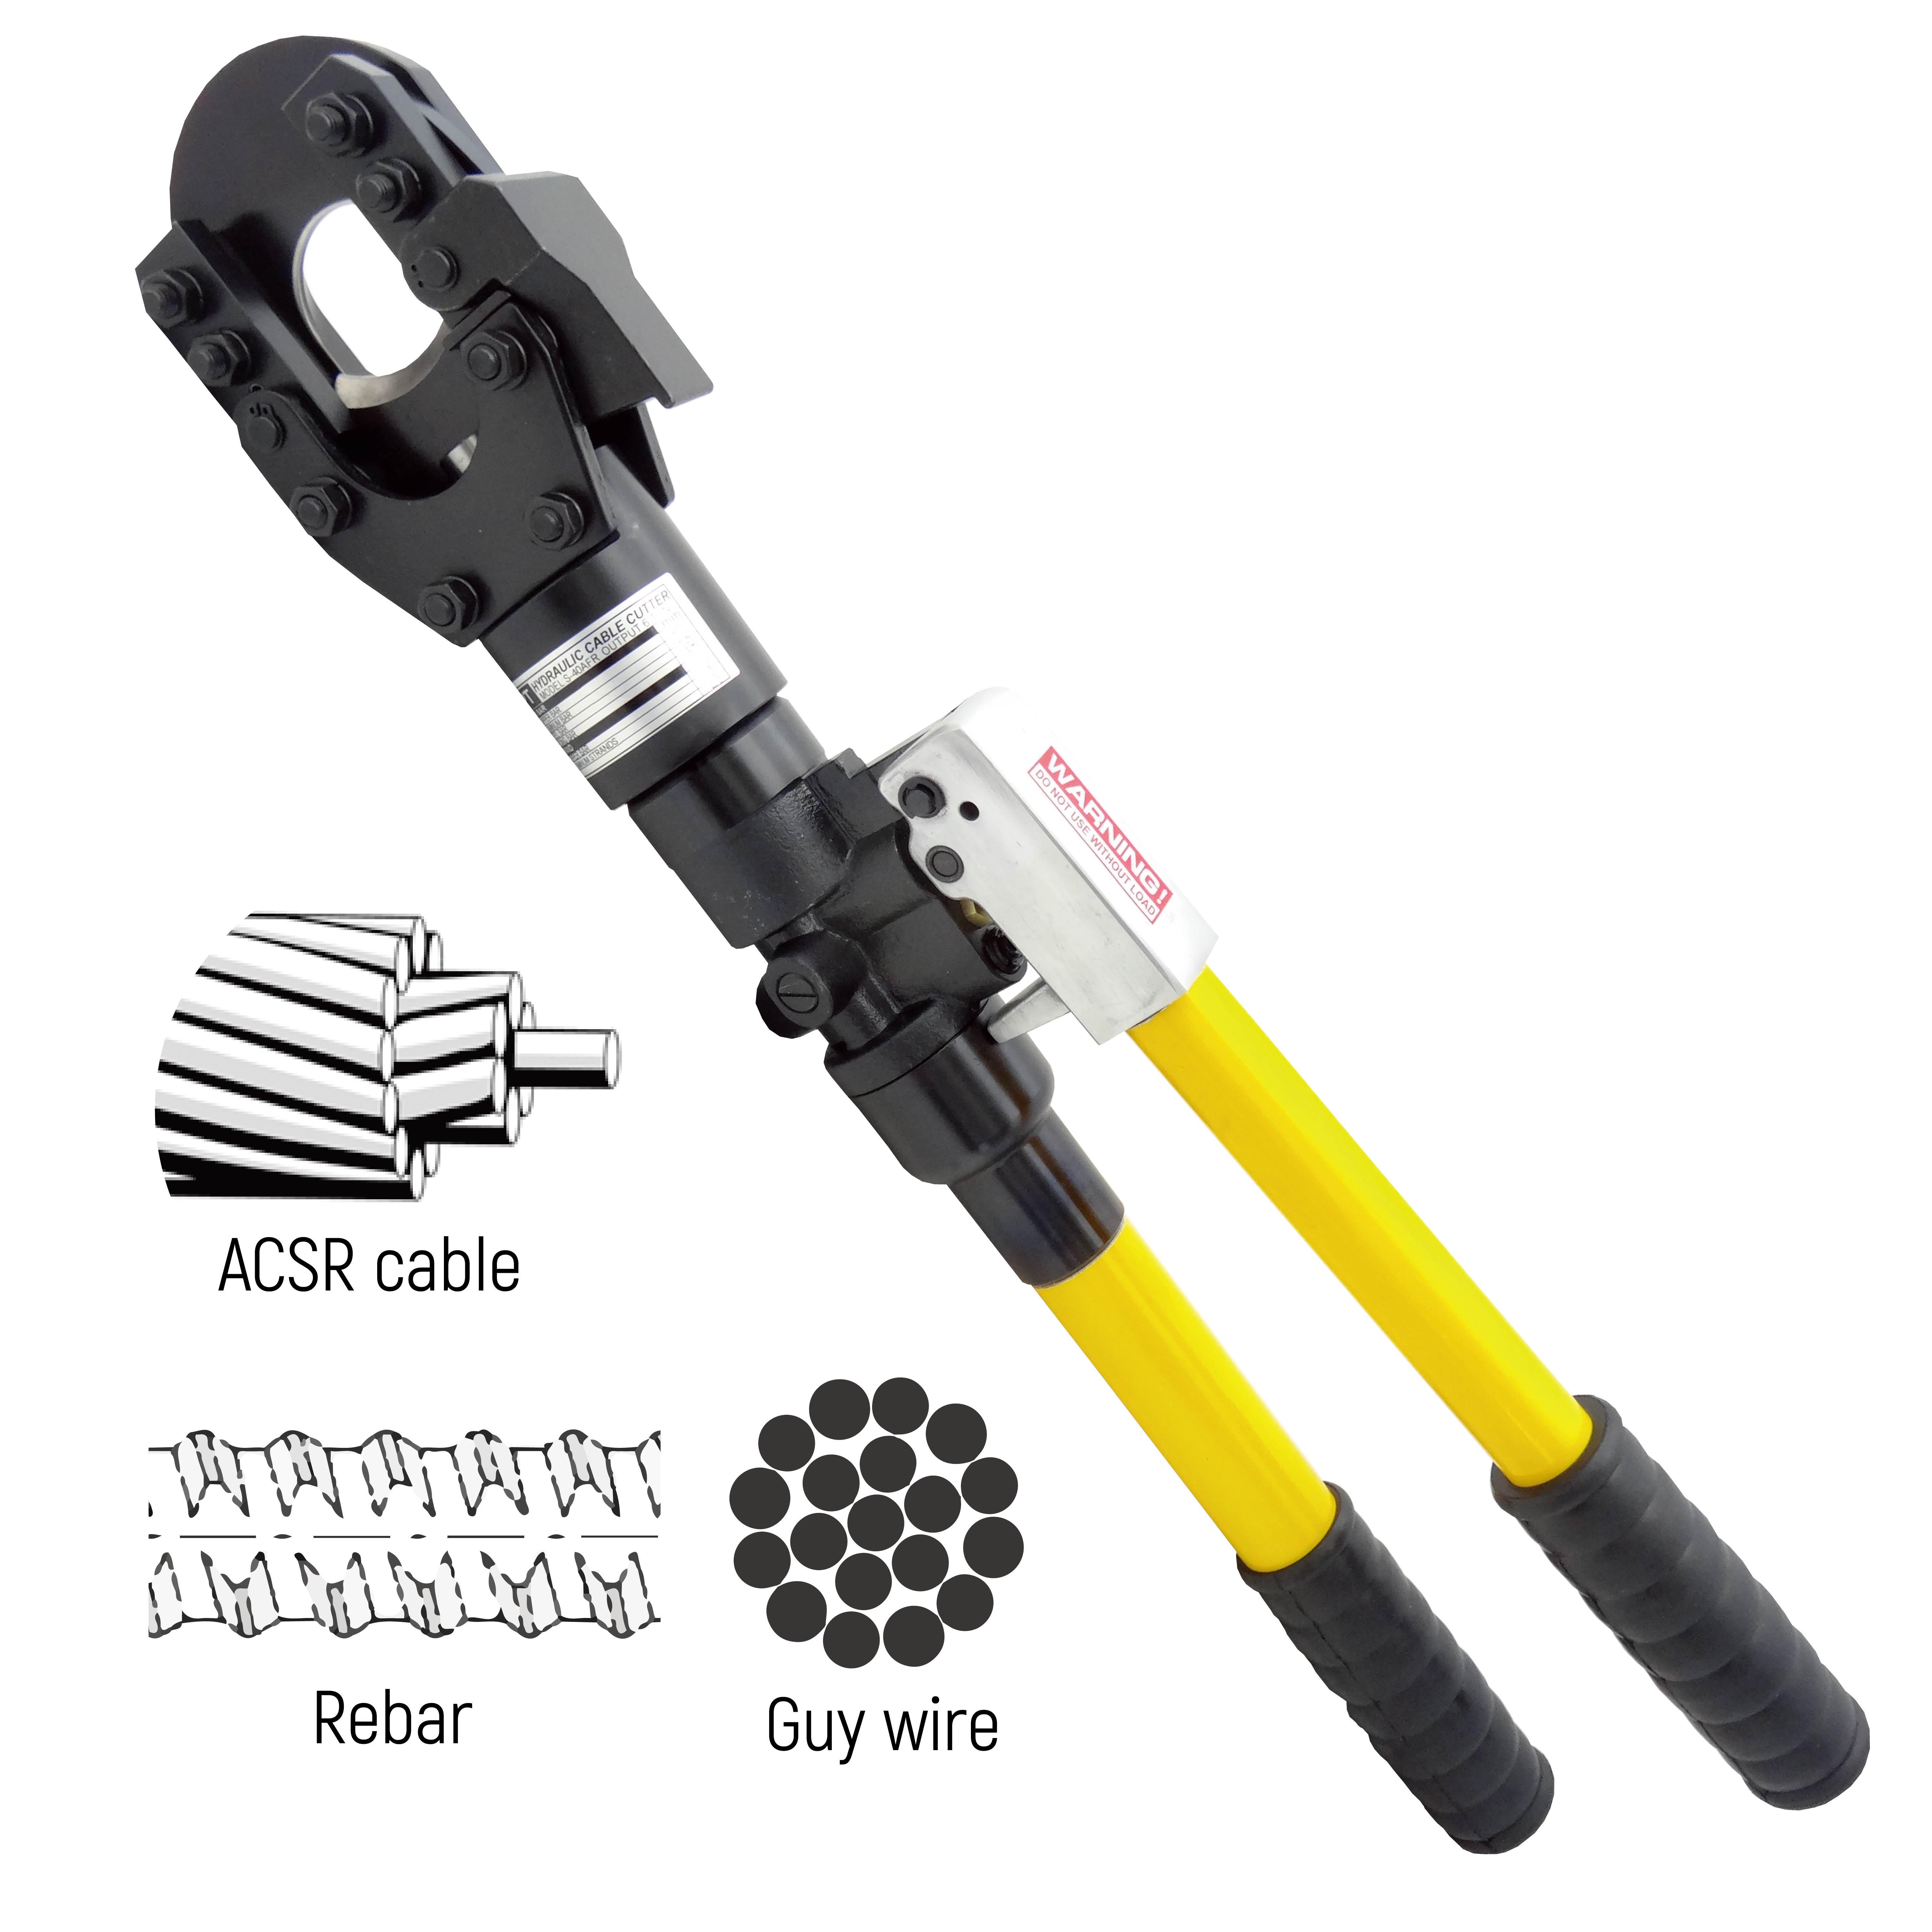 MANUAL HYDRAULIC CABLE CUTTERS